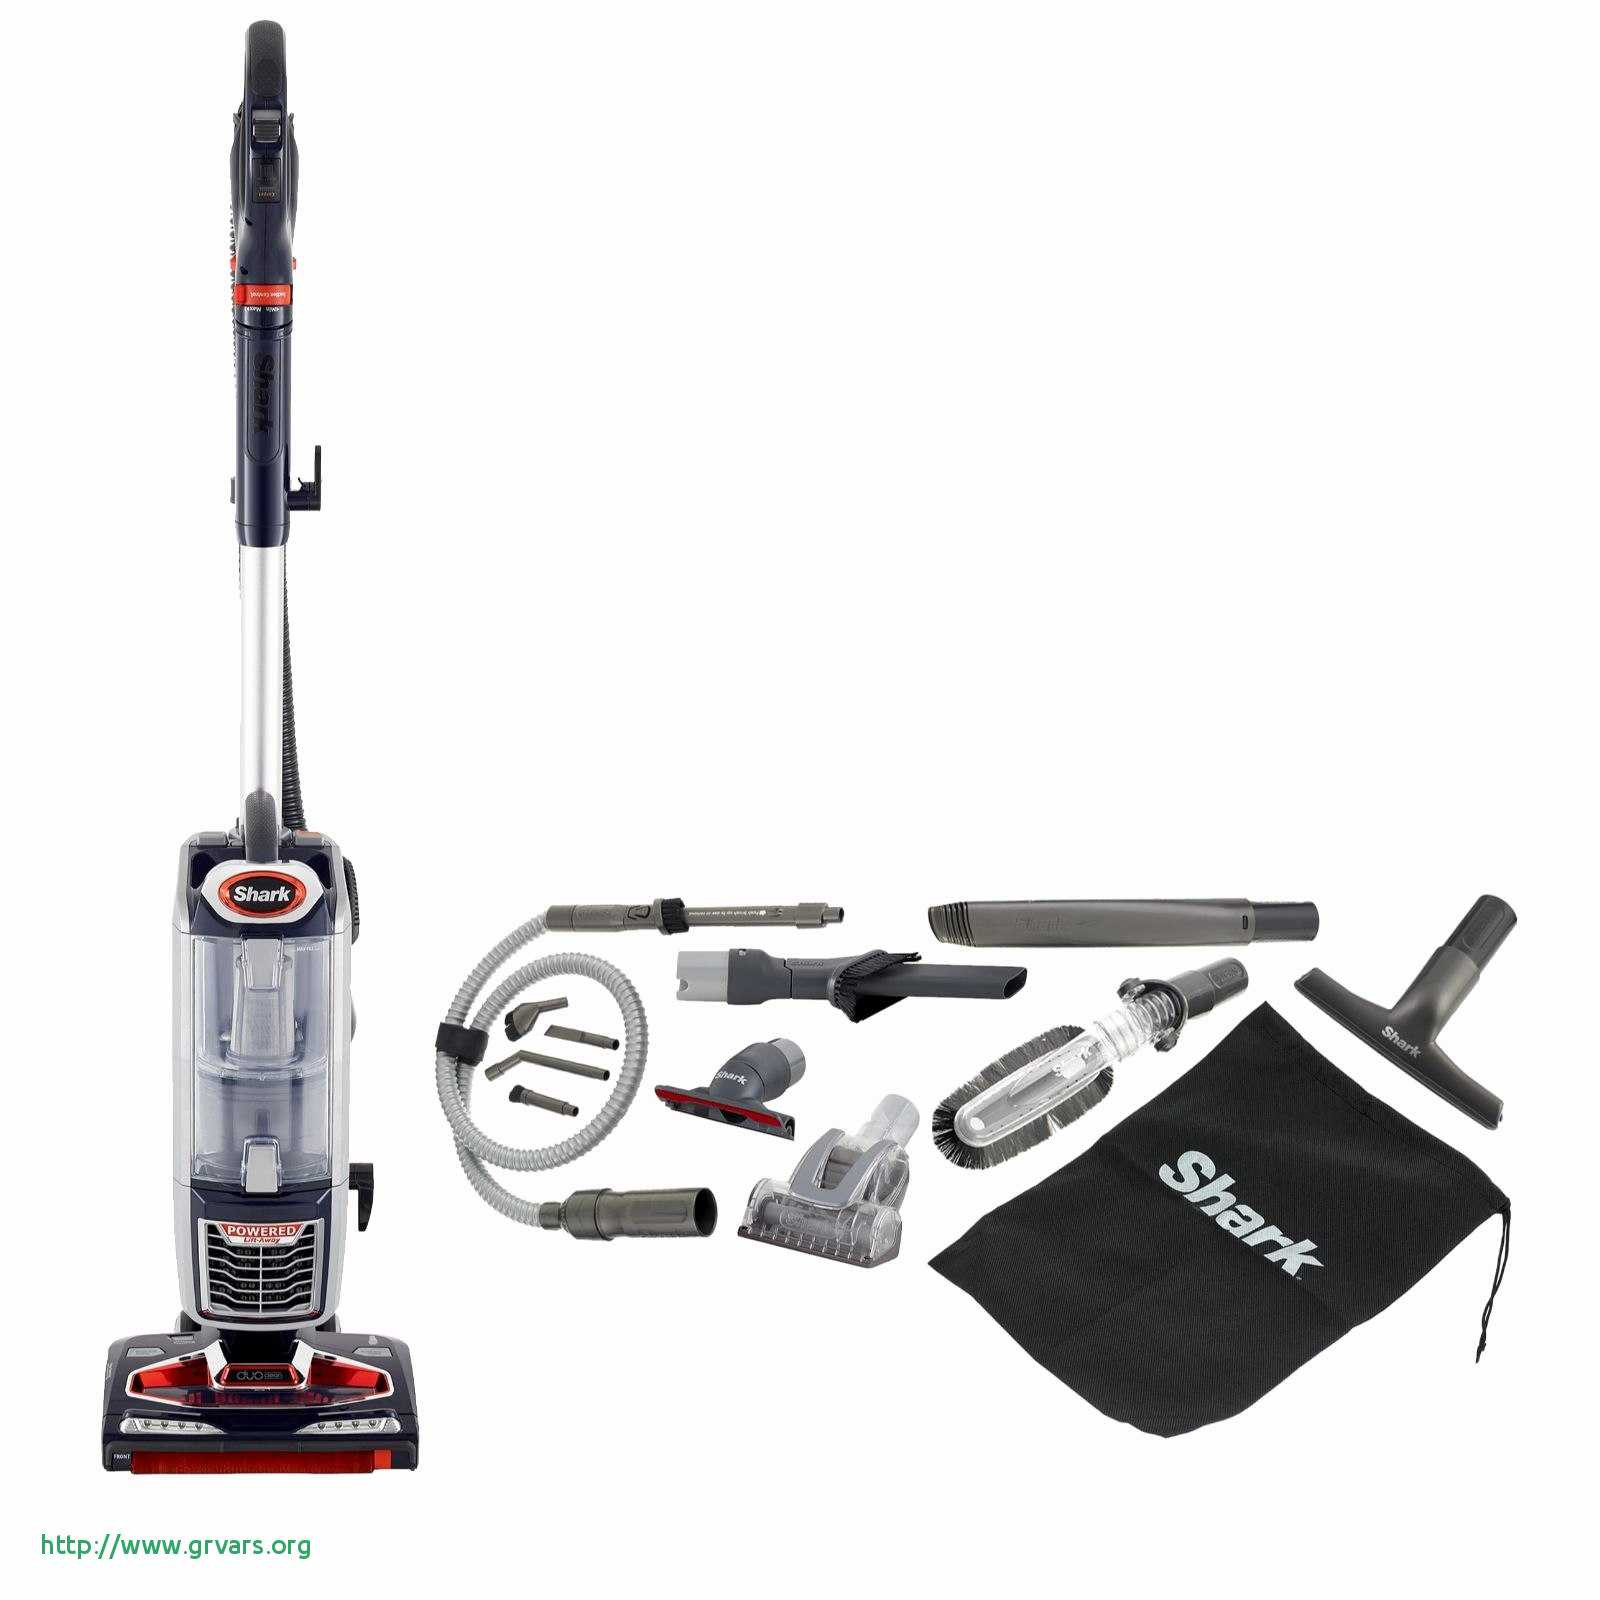 best broom for hardwood floors and pet hair of 15 inspirant best vaccum for hardwood floors ideas blog with best bagless vacuum for hardwood floors unique 50 fresh best vacuum for hardwood floors and pets